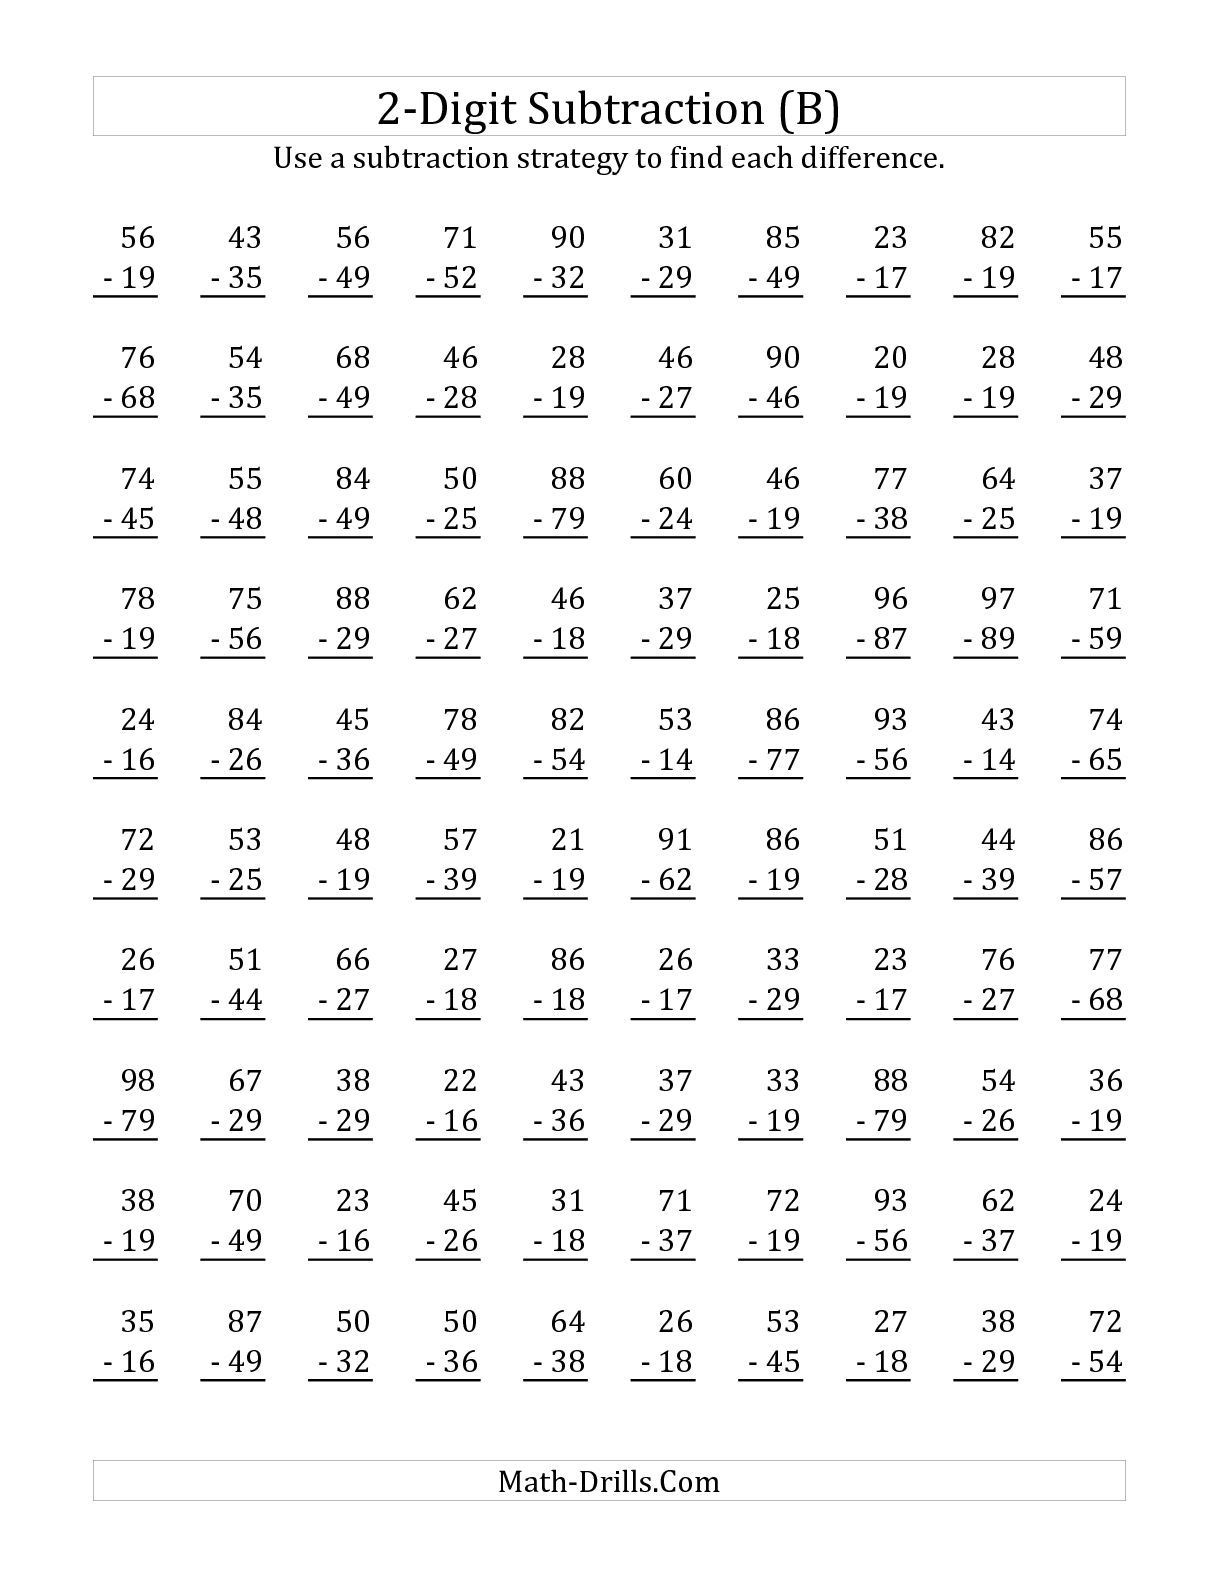 Free Math Worksheets Third Grade 3 Addition Add 3 Digit Numbers In Columns with Regrouping